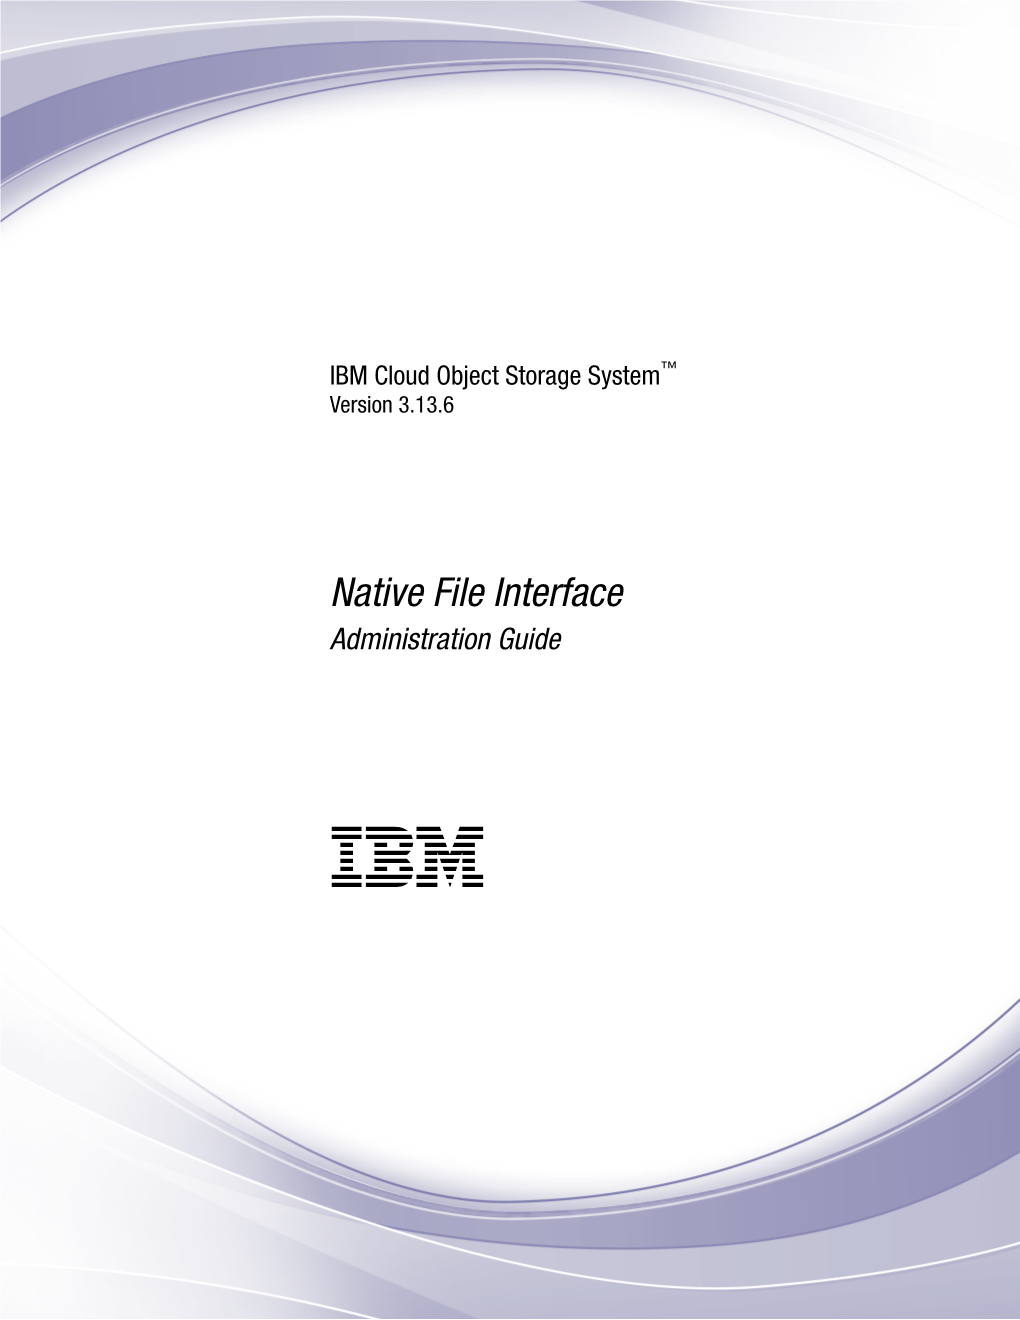 IBM Cloud Object Storage System : Native File Interface Administration